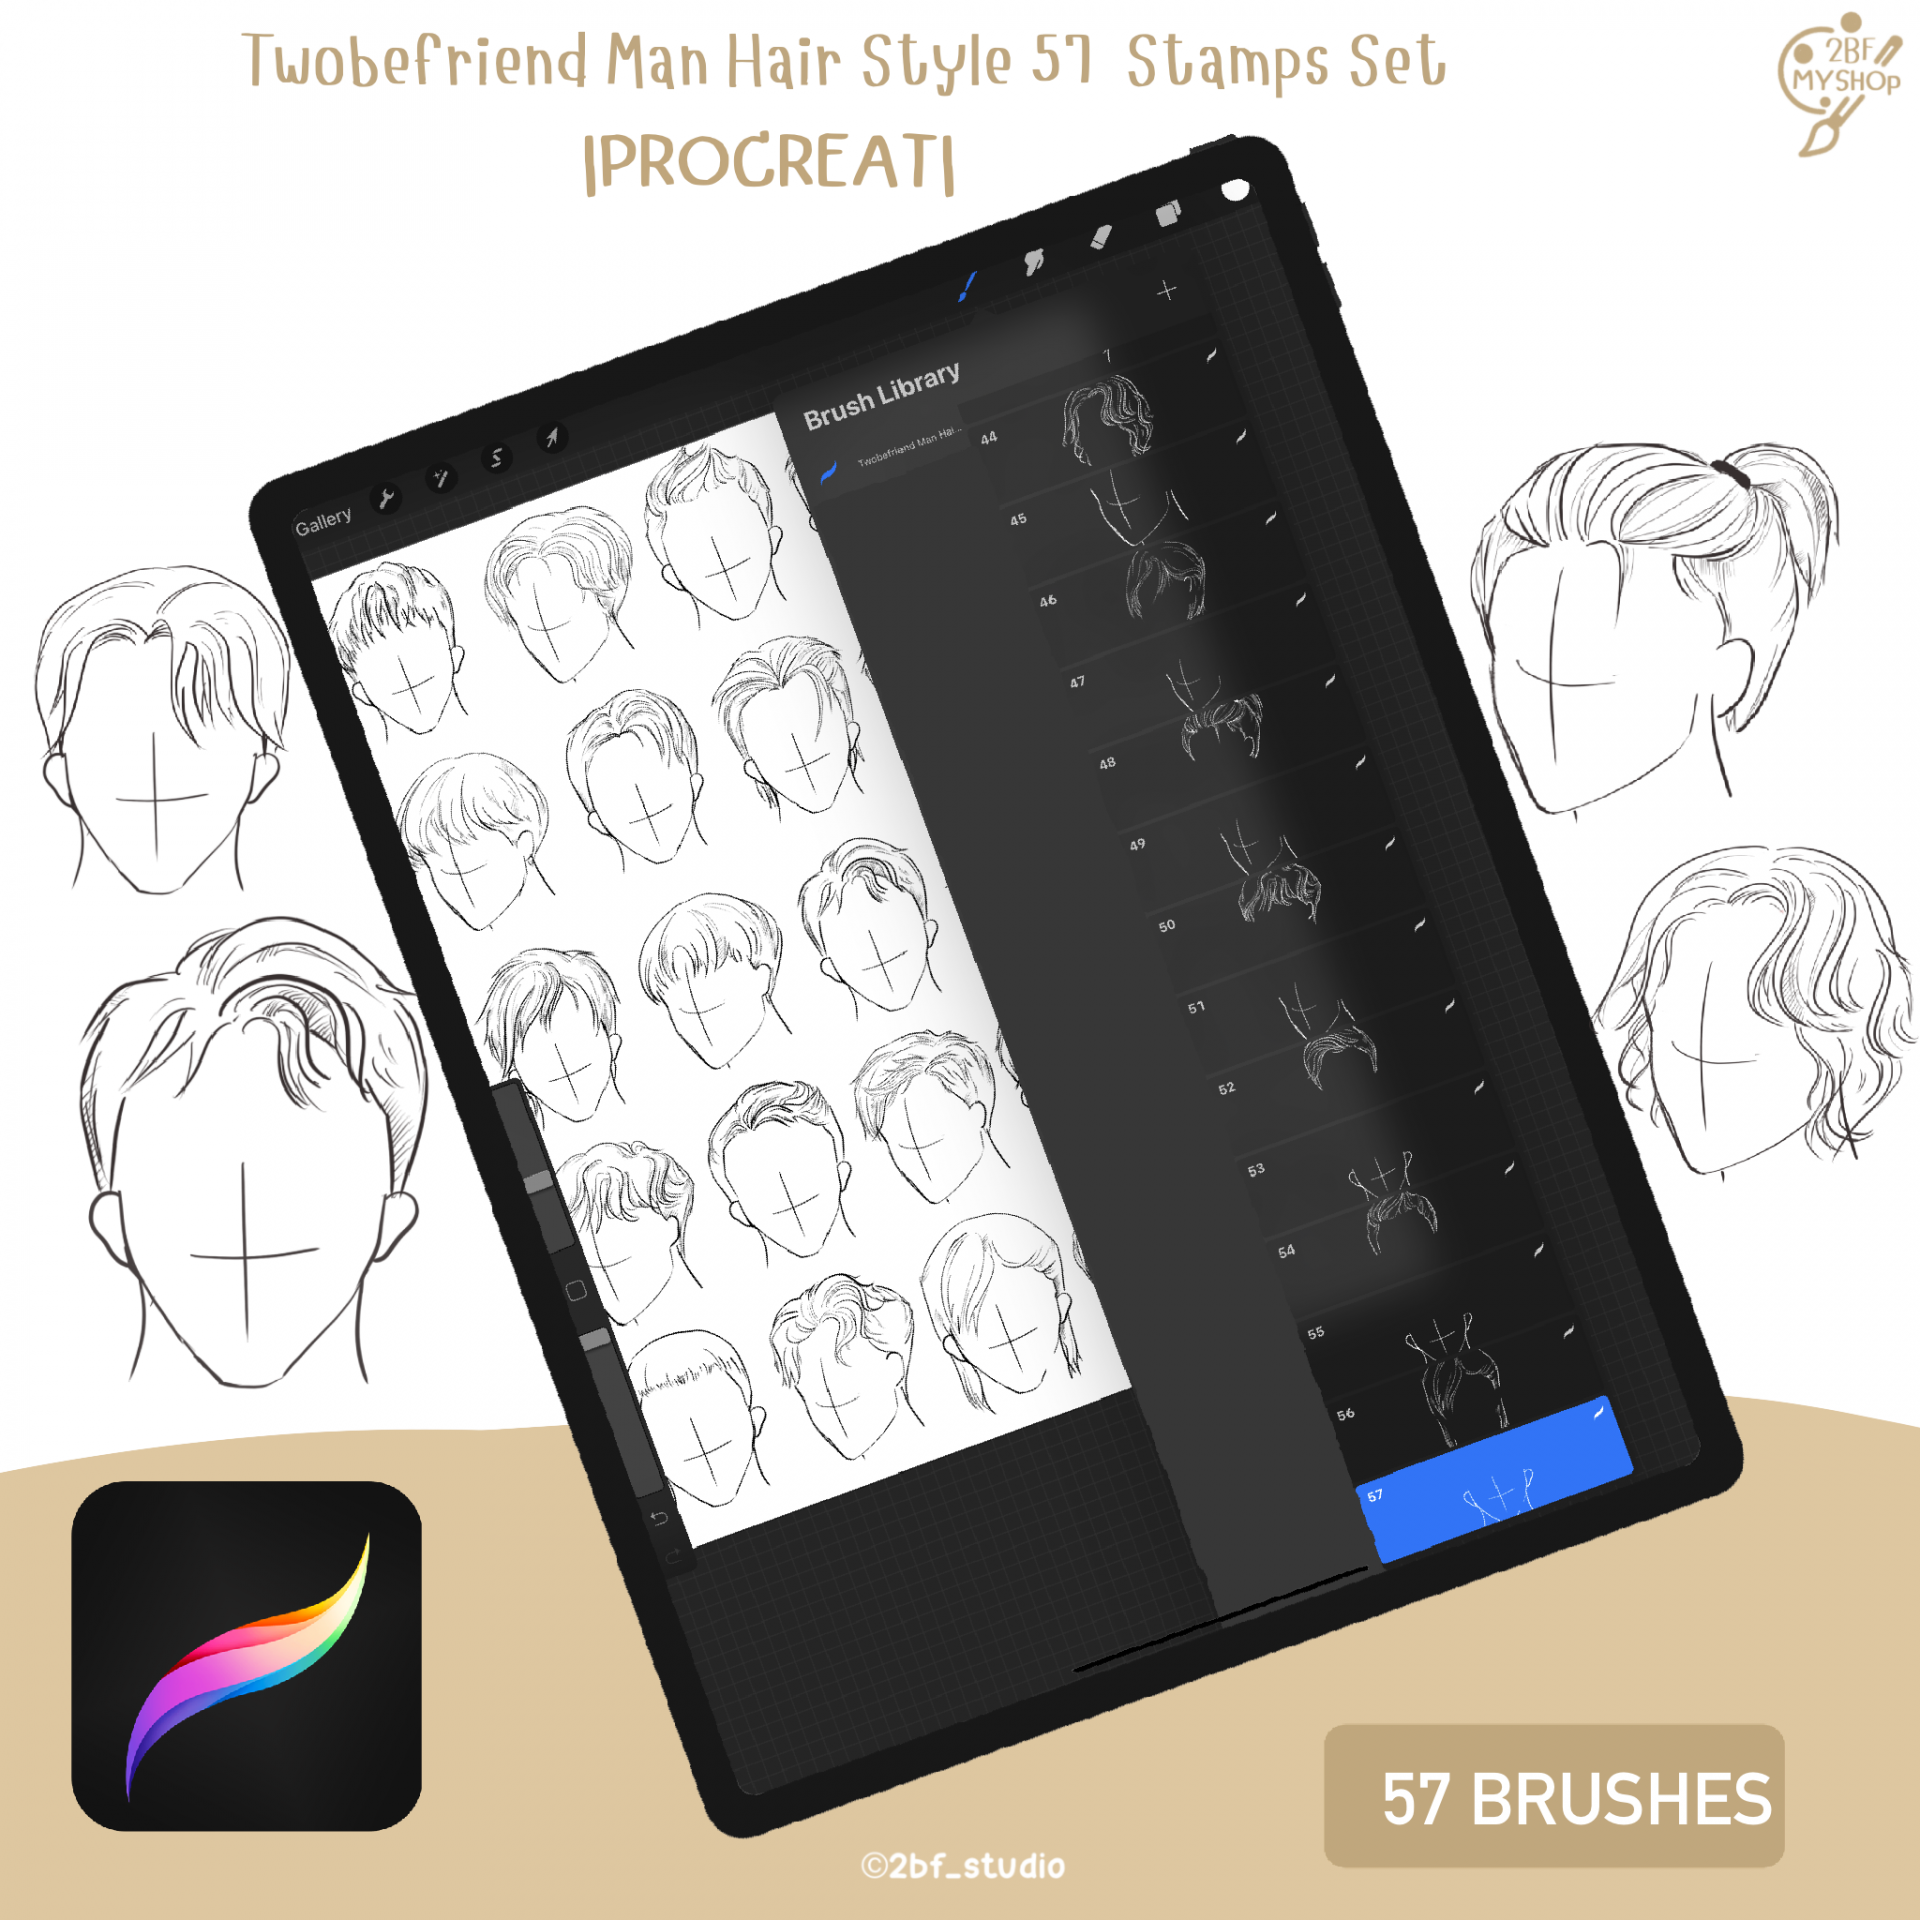 Twobefriend Man Hair Style 57  Stamps Set |PROCREAT BRUSHED|